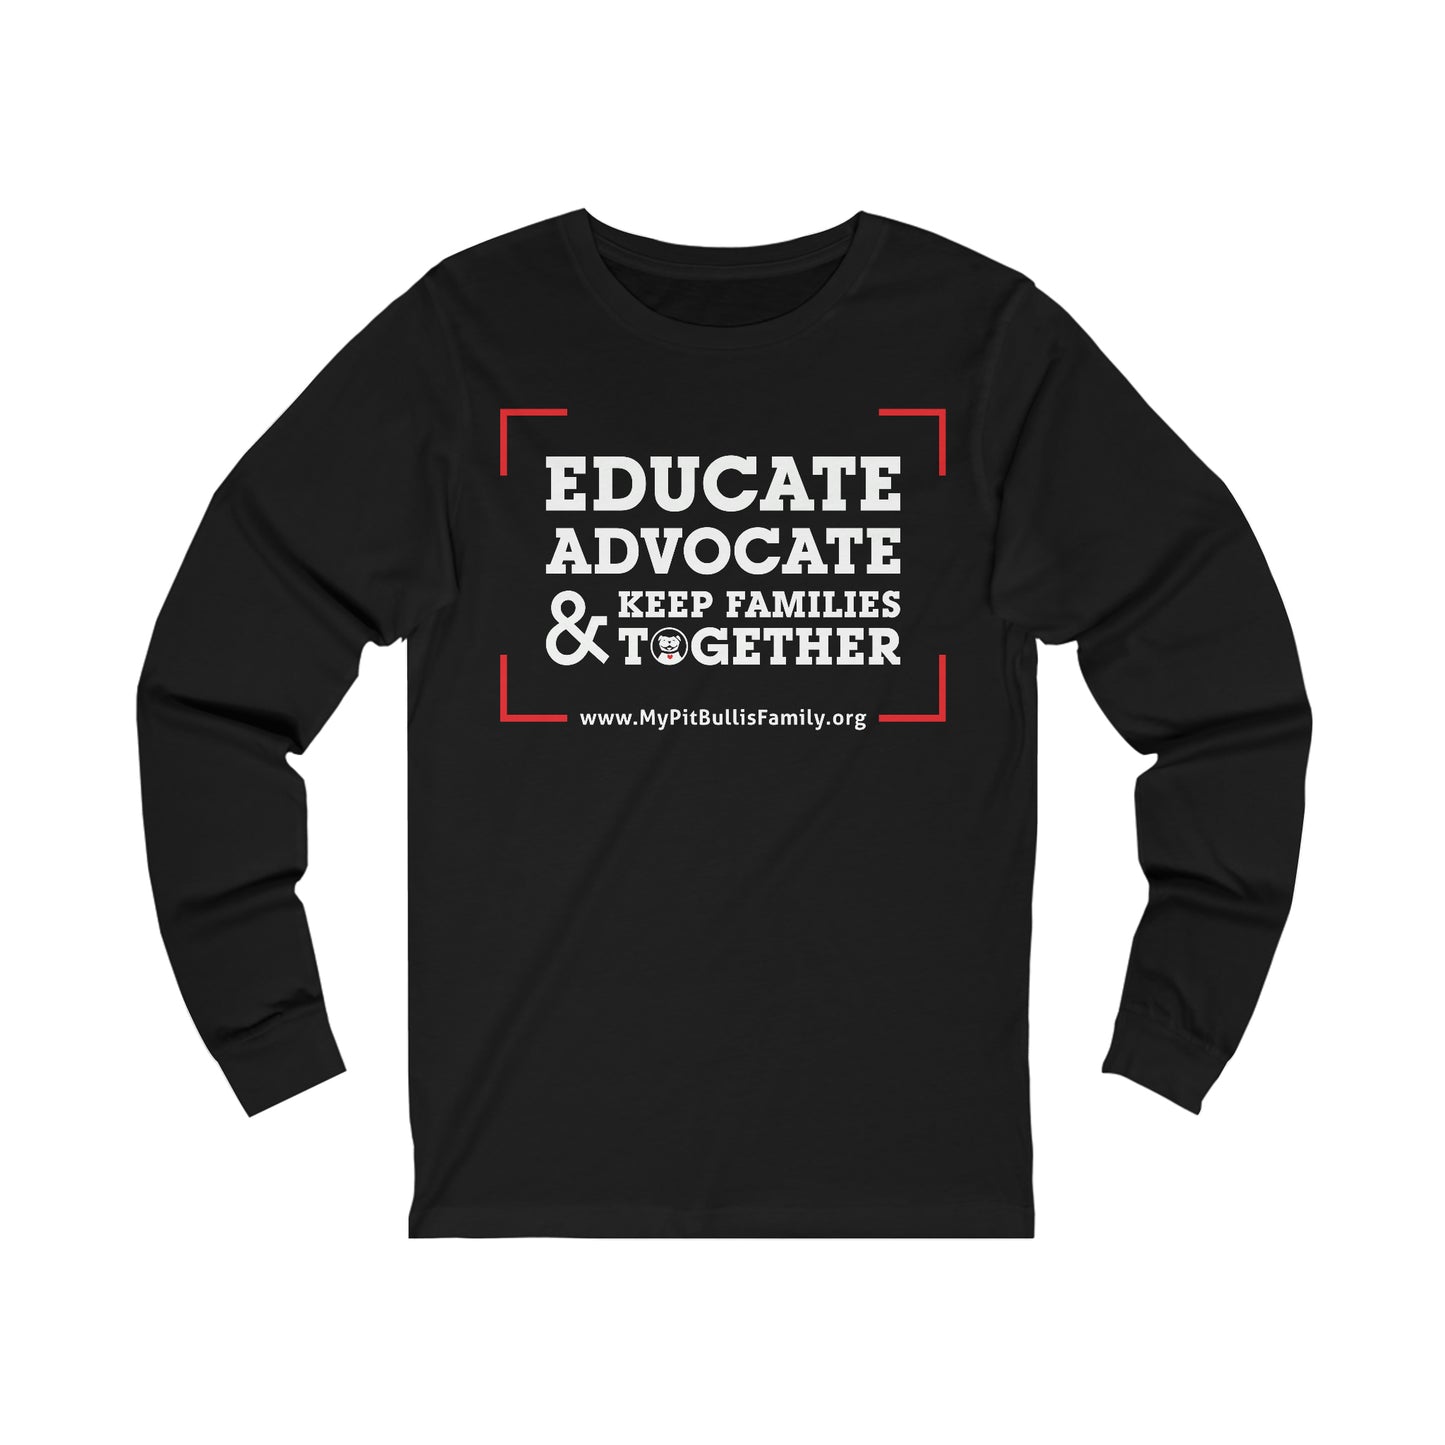 Keep Families Together Unisex Jersey Long Sleeve Tee